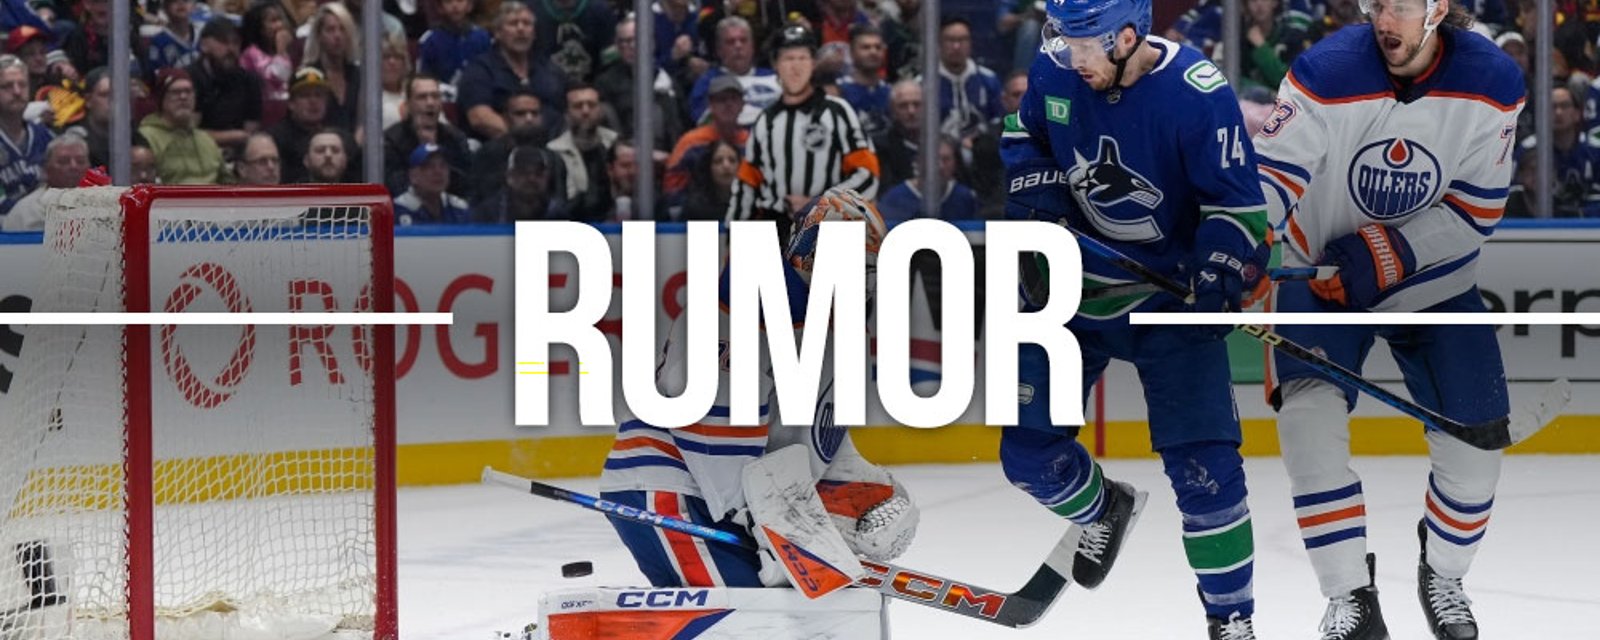 Reports that Oilers coach made racist gestures to Canucks fan last night